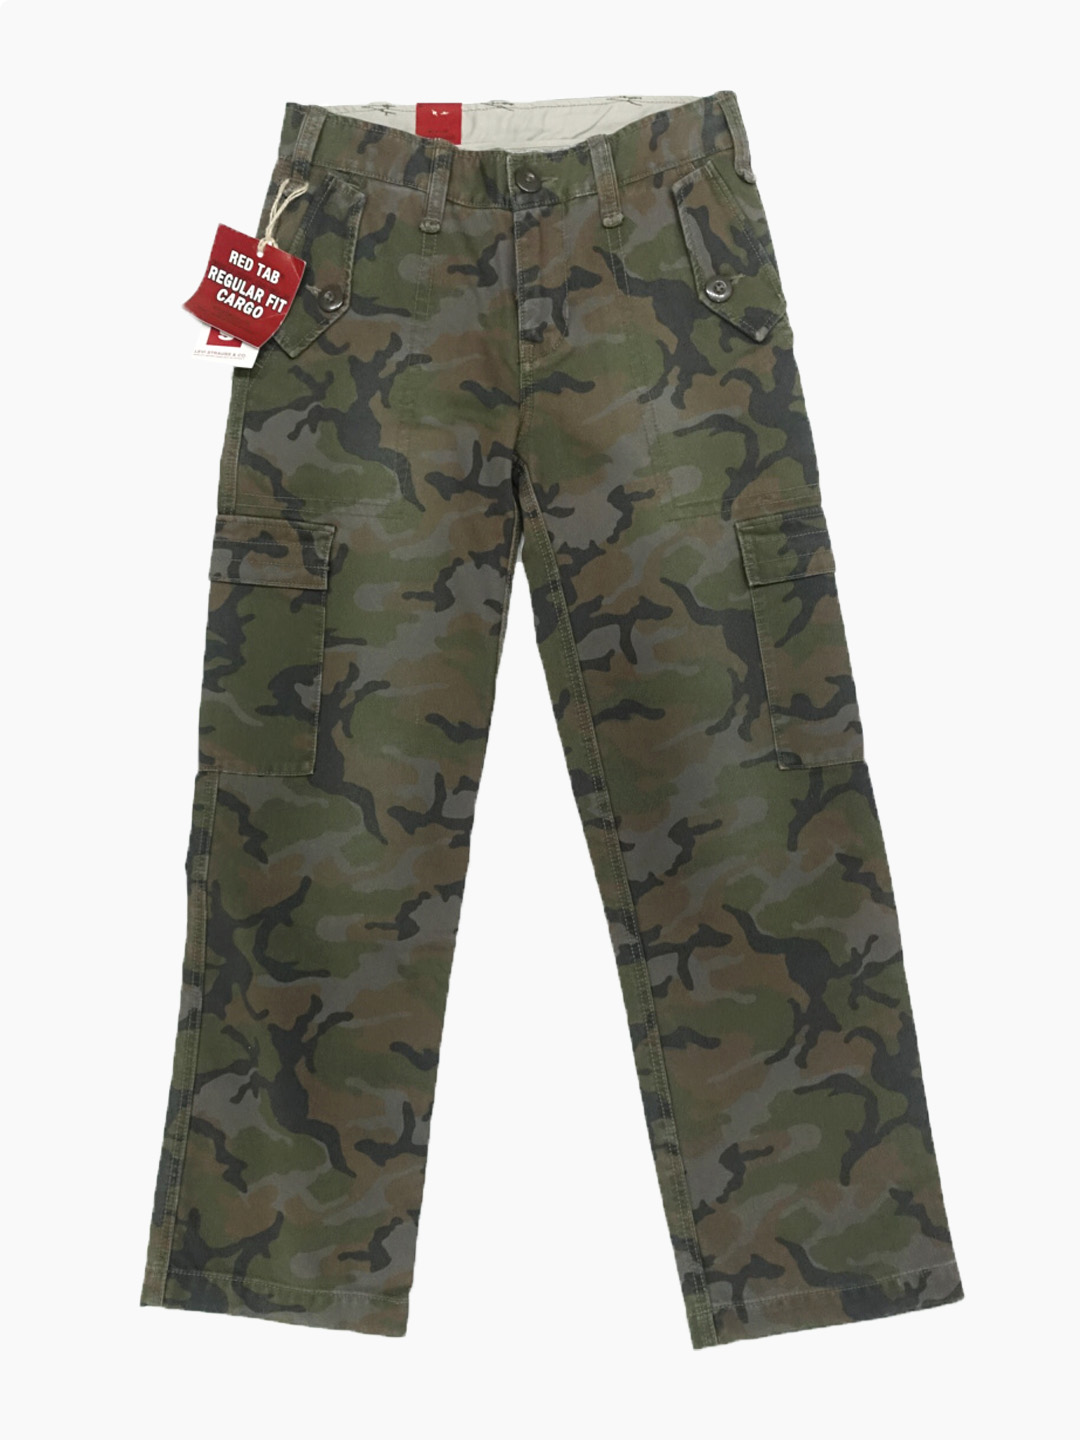 LEVIS RED TABCamouflage cargo pants